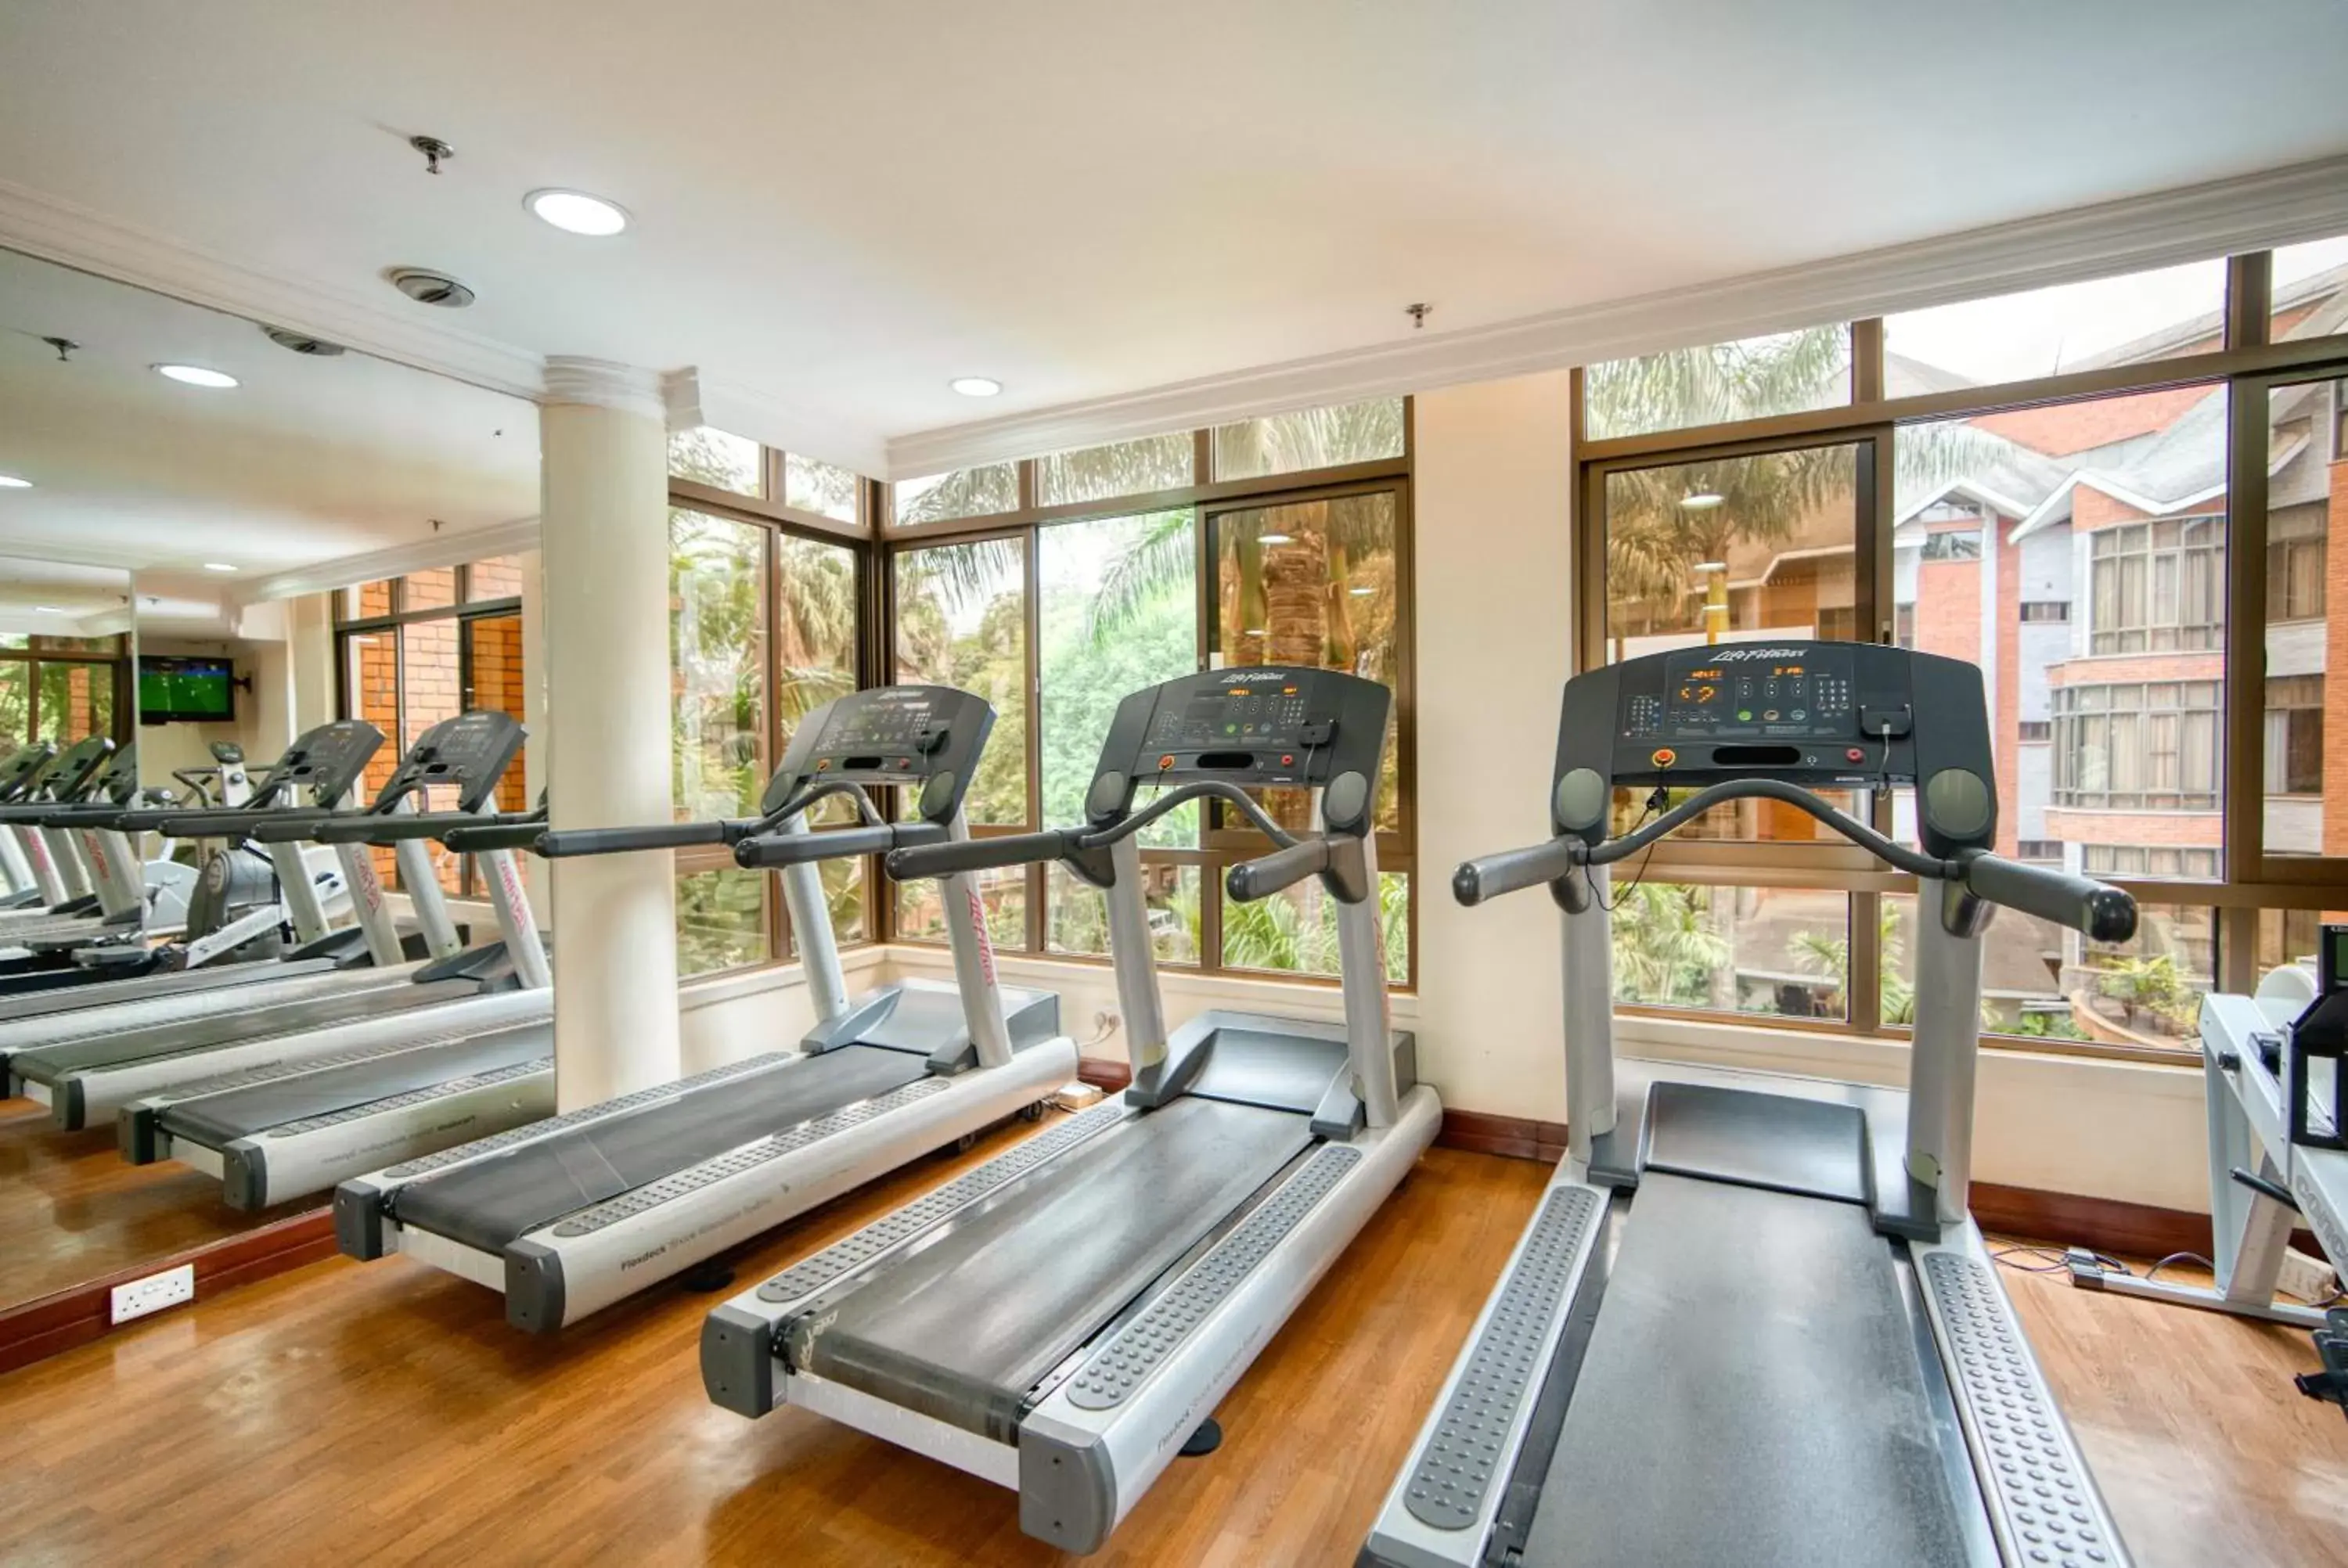 Fitness centre/facilities, Fitness Center/Facilities in Kibo Palace Hotel Arusha